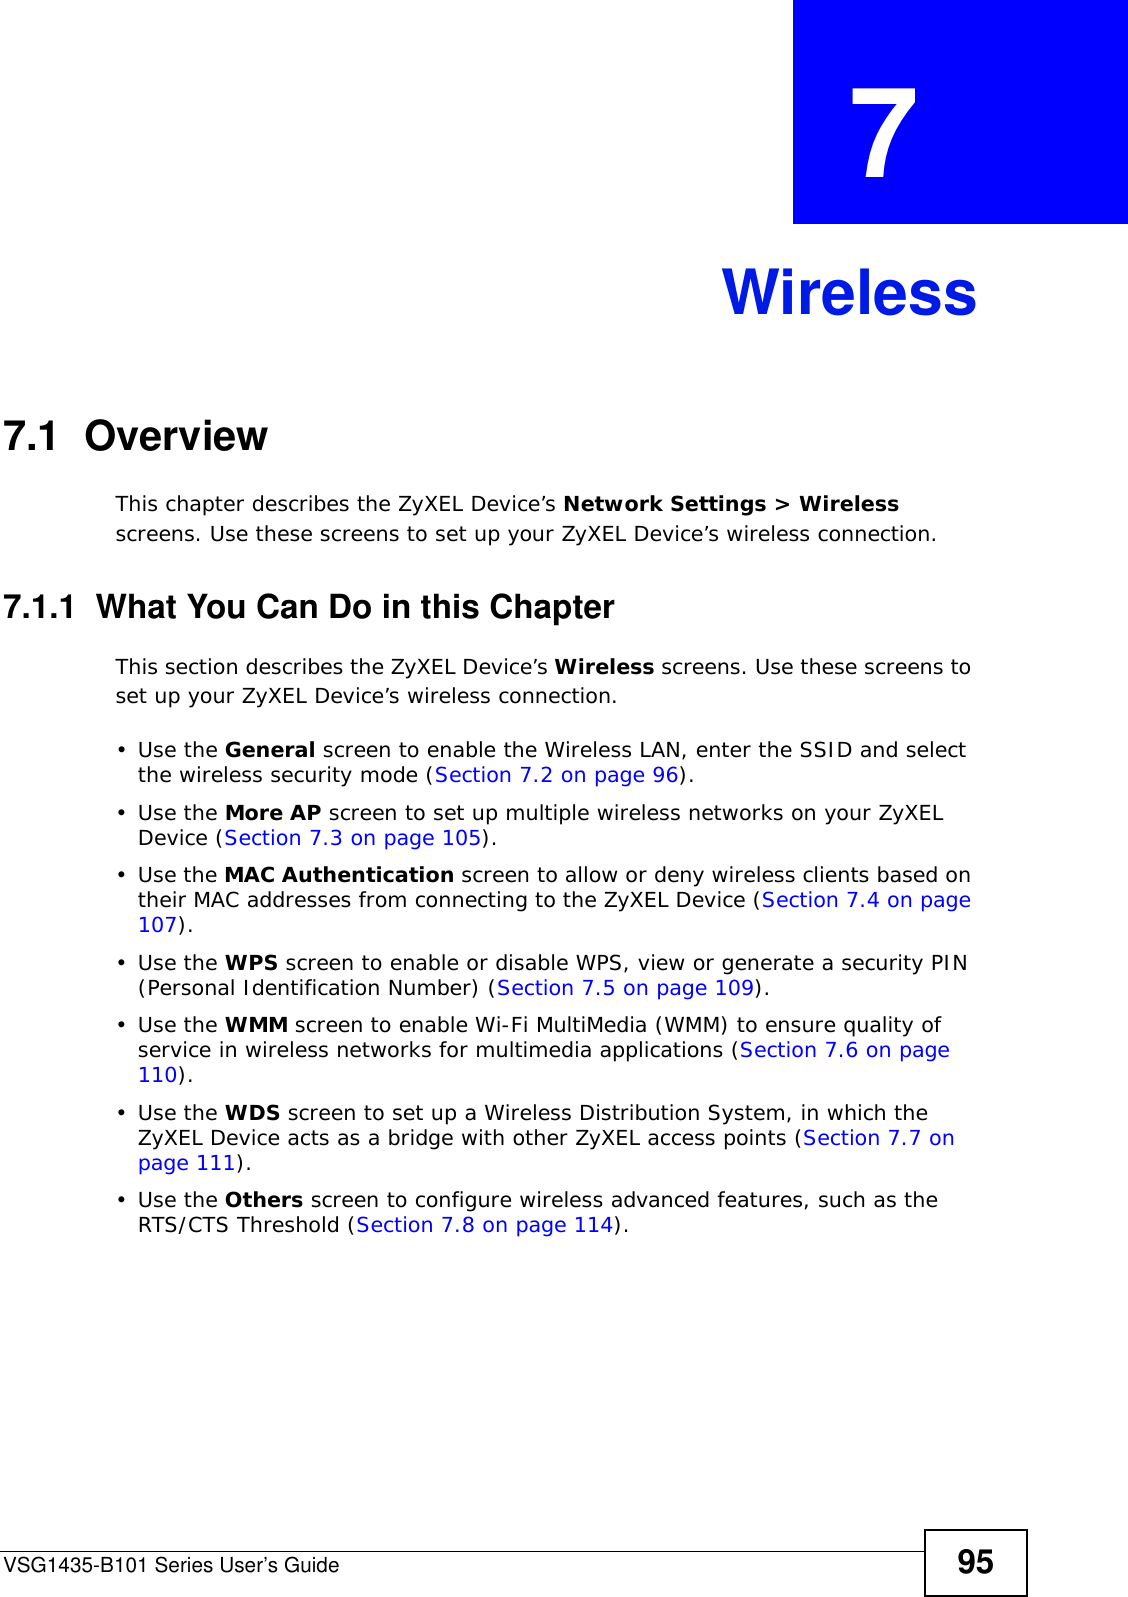 VSG1435-B101 Series User’s Guide 95CHAPTER  7 Wireless7.1  Overview This chapter describes the ZyXEL Device’s Network Settings &gt; Wireless screens. Use these screens to set up your ZyXEL Device’s wireless connection.7.1.1  What You Can Do in this ChapterThis section describes the ZyXEL Device’s Wireless screens. Use these screens to set up your ZyXEL Device’s wireless connection.•Use the General screen to enable the Wireless LAN, enter the SSID and select the wireless security mode (Section 7.2 on page 96).•Use the More AP screen to set up multiple wireless networks on your ZyXEL Device (Section 7.3 on page 105).•Use the MAC Authentication screen to allow or deny wireless clients based on their MAC addresses from connecting to the ZyXEL Device (Section 7.4 on page 107).•Use the WPS screen to enable or disable WPS, view or generate a security PIN (Personal Identification Number) (Section 7.5 on page 109).•Use the WMM screen to enable Wi-Fi MultiMedia (WMM) to ensure quality of service in wireless networks for multimedia applications (Section 7.6 on page 110). •Use the WDS screen to set up a Wireless Distribution System, in which the ZyXEL Device acts as a bridge with other ZyXEL access points (Section 7.7 on page 111).•Use the Others screen to configure wireless advanced features, such as the RTS/CTS Threshold (Section 7.8 on page 114).